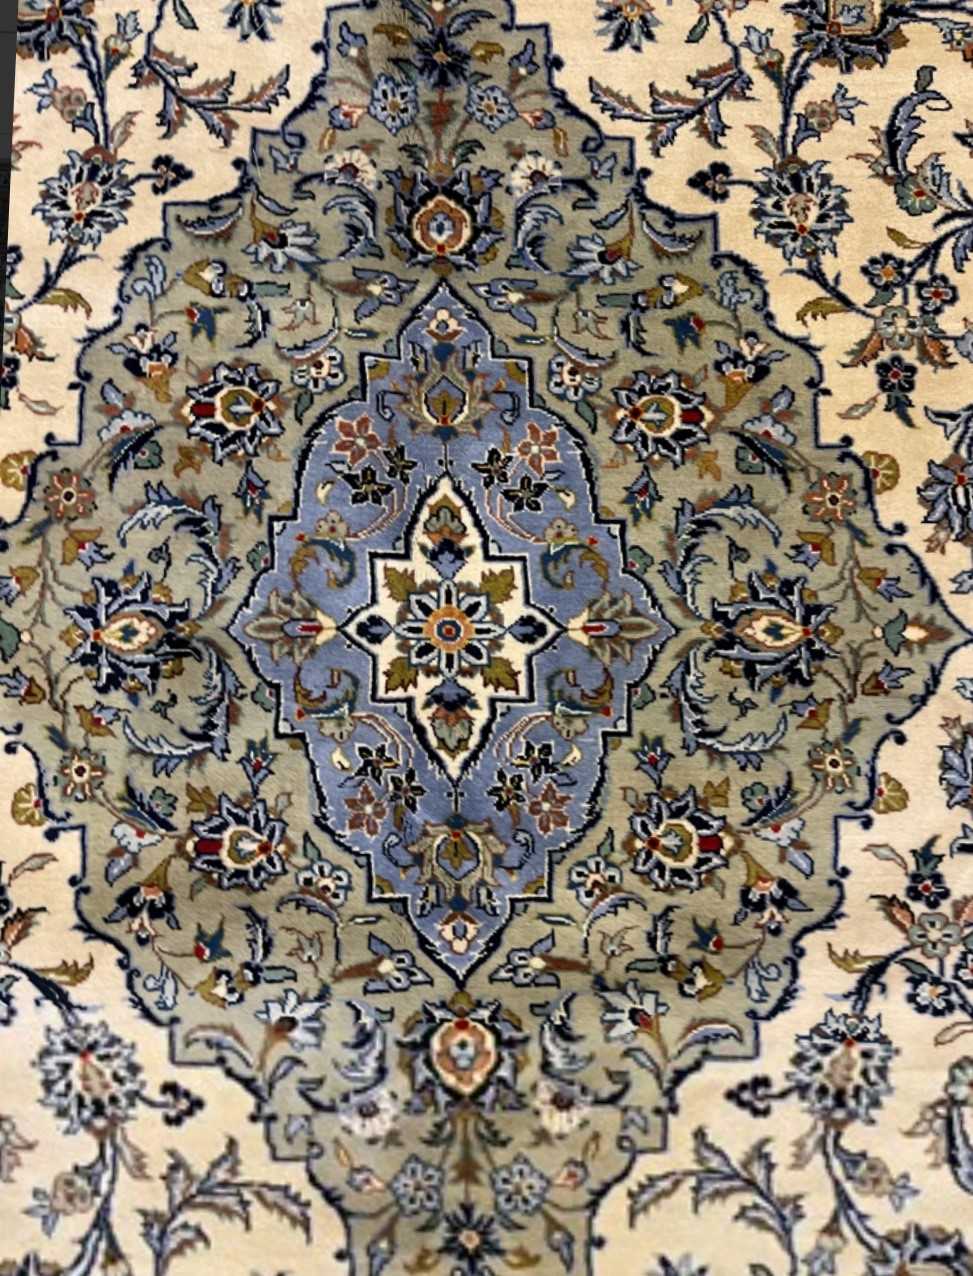 20th century Persian Kashan rug with central lozenge shaped medallion, scrolling floral and foliate - Image 8 of 10